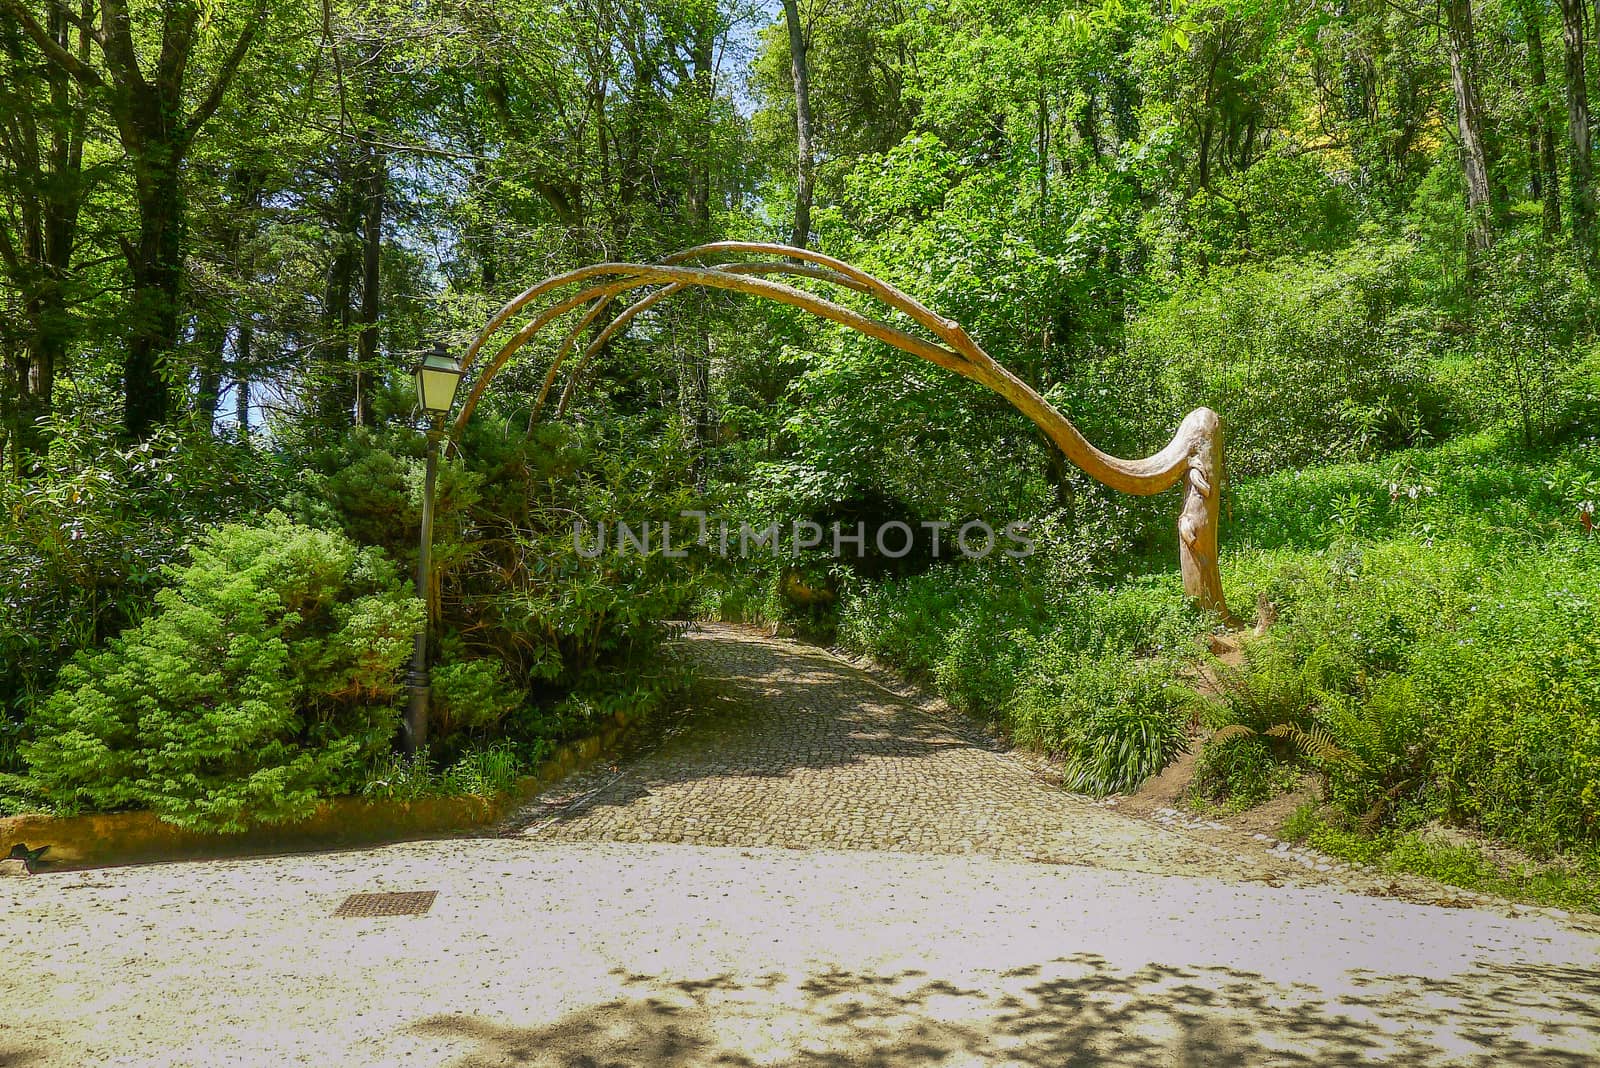 Tree curving round in a park in Sintra in Portugal by chrisukphoto